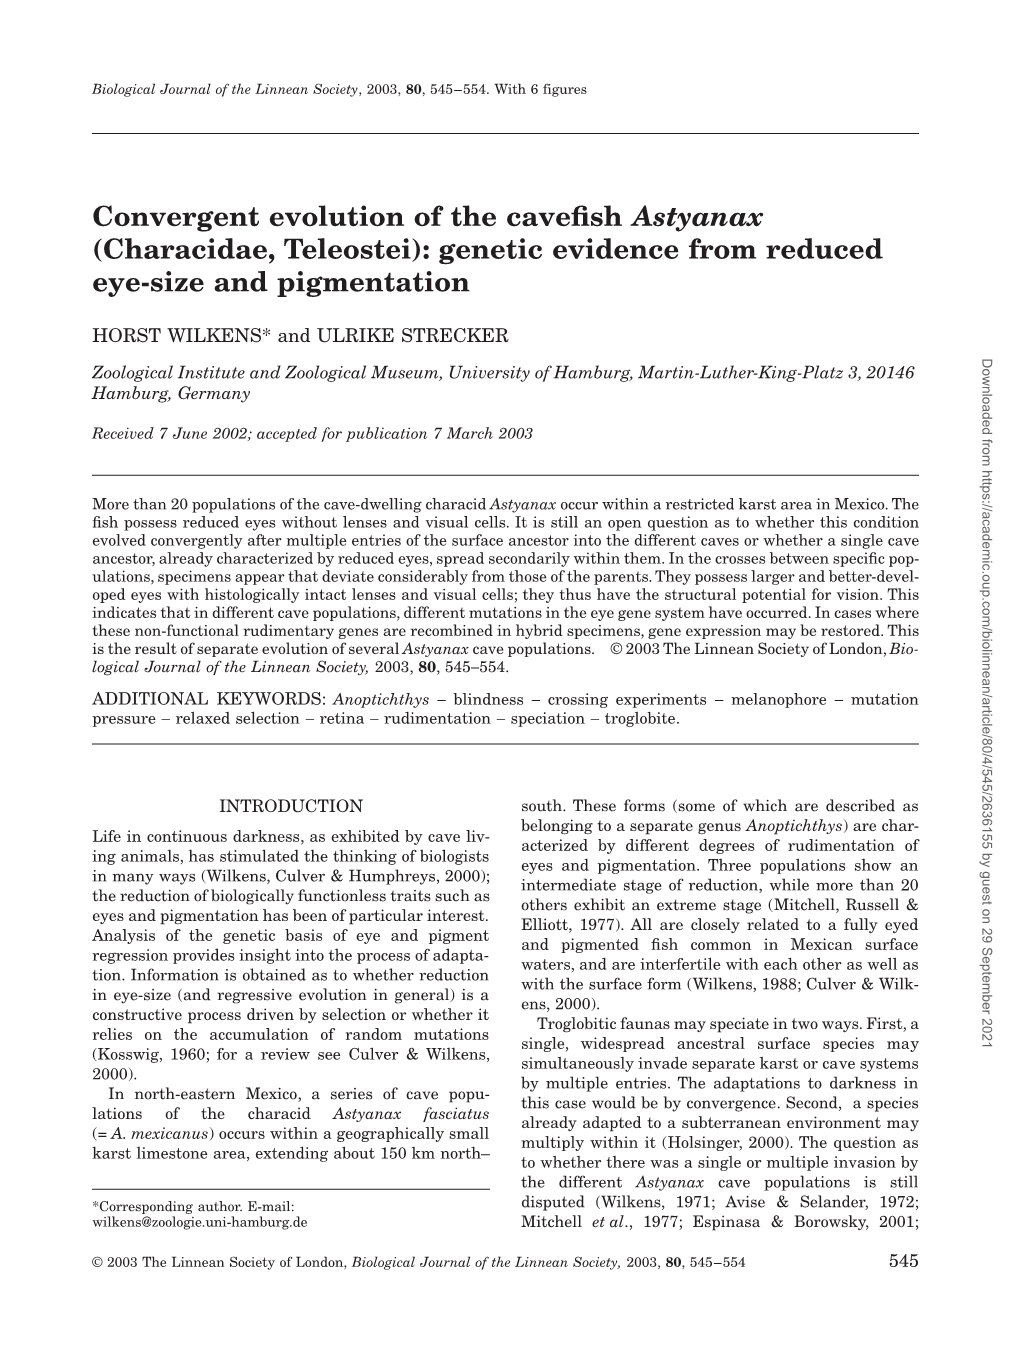 Convergent Evolution of the Cavefish Astyanax (Characidae, Teleostei)